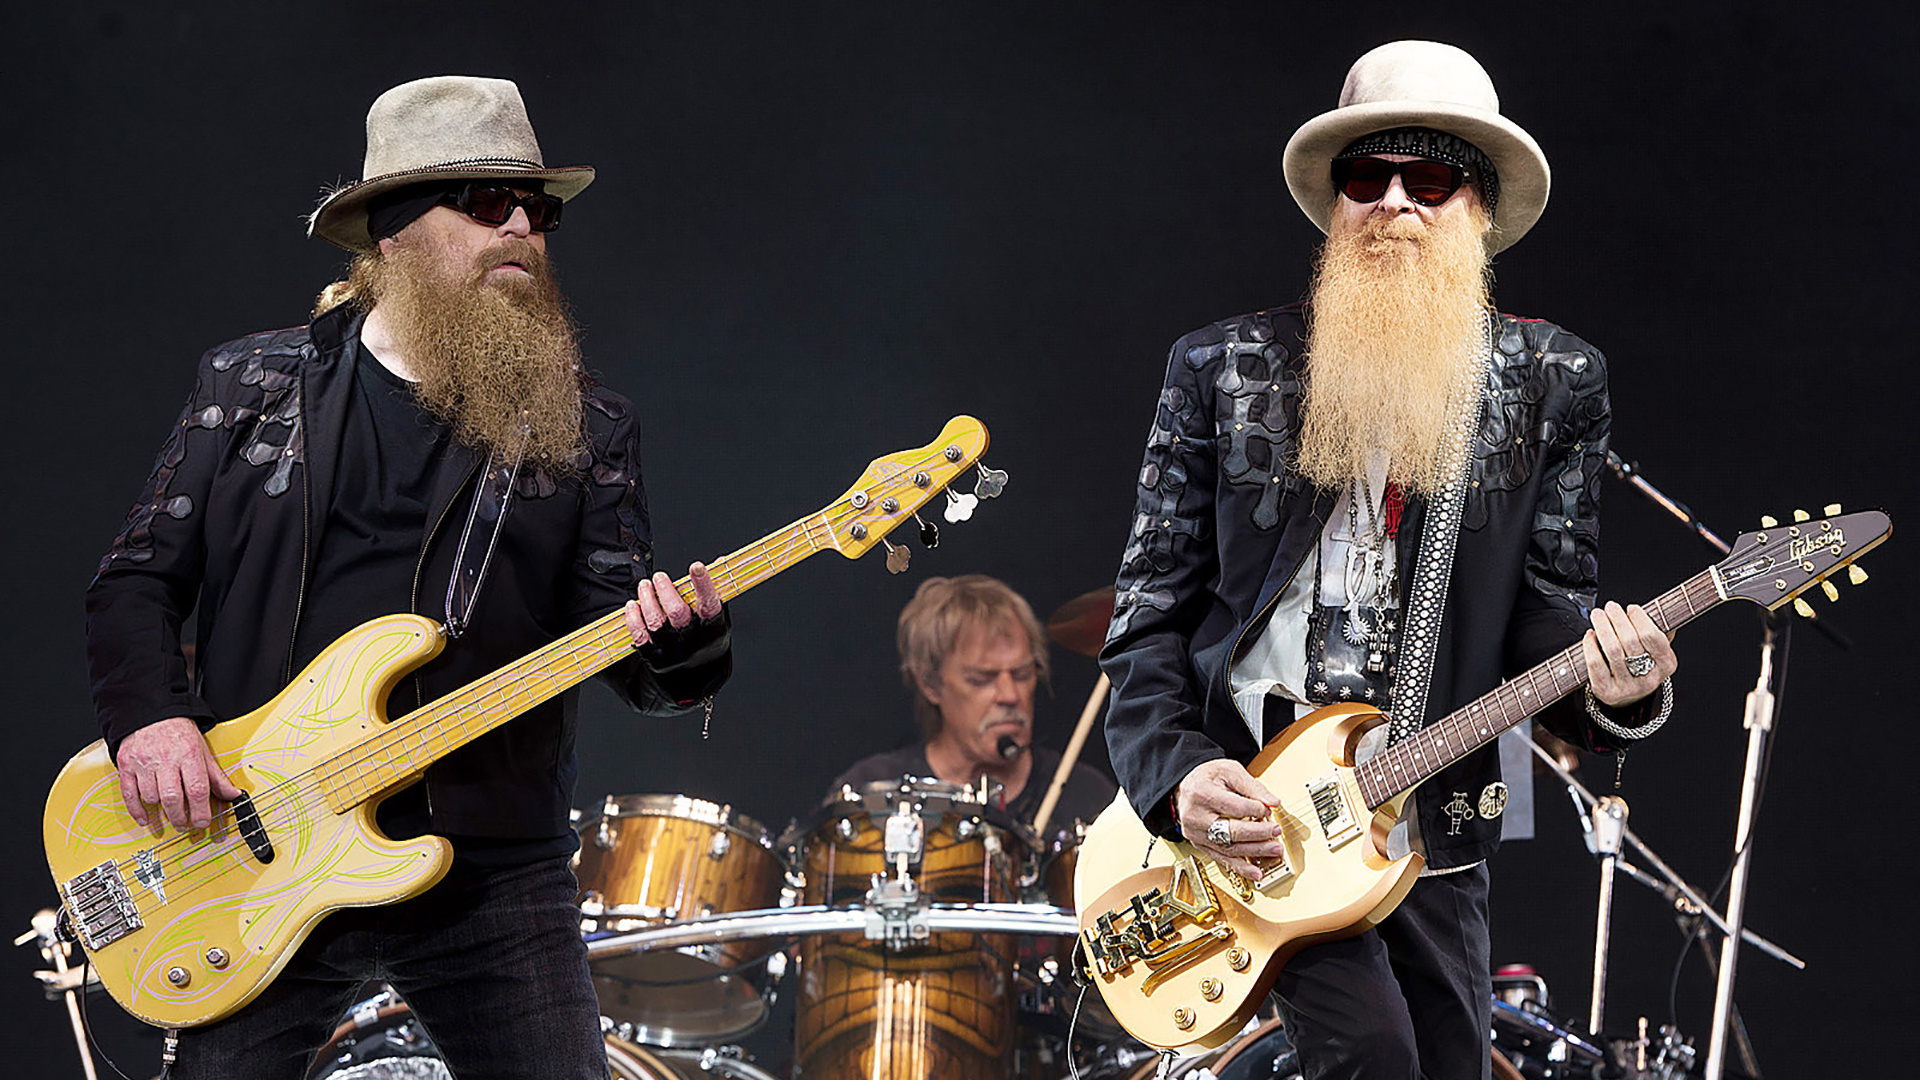 ZZ Top: That Little Ol' Band from Texas | Alamo Drafthouse Cinema 1920x1080